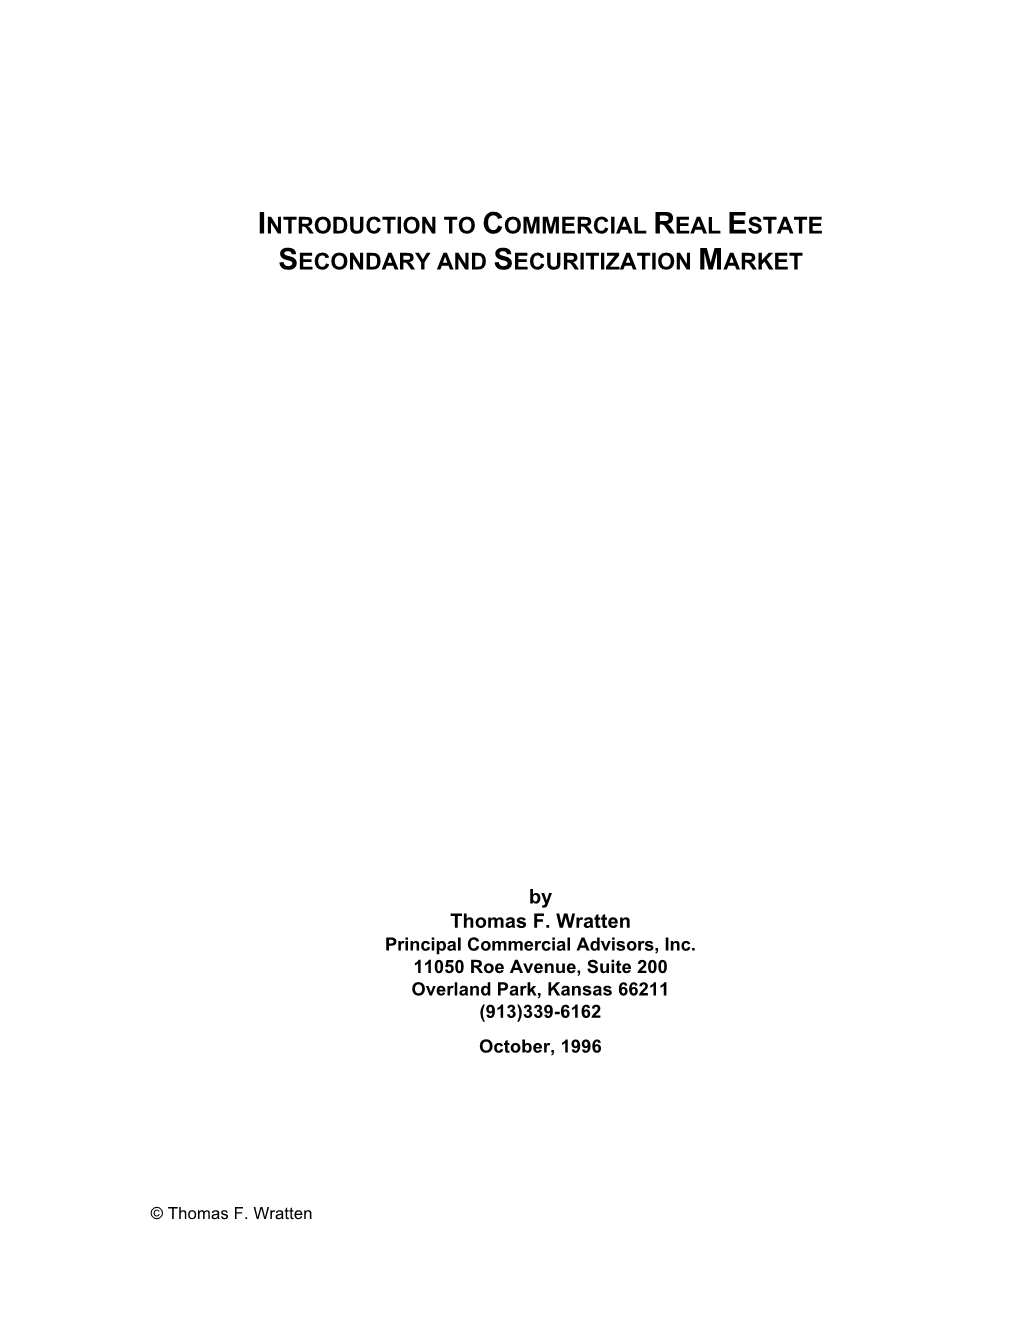 Introduction to Commercial Real Estate Secondary and Securitization Market